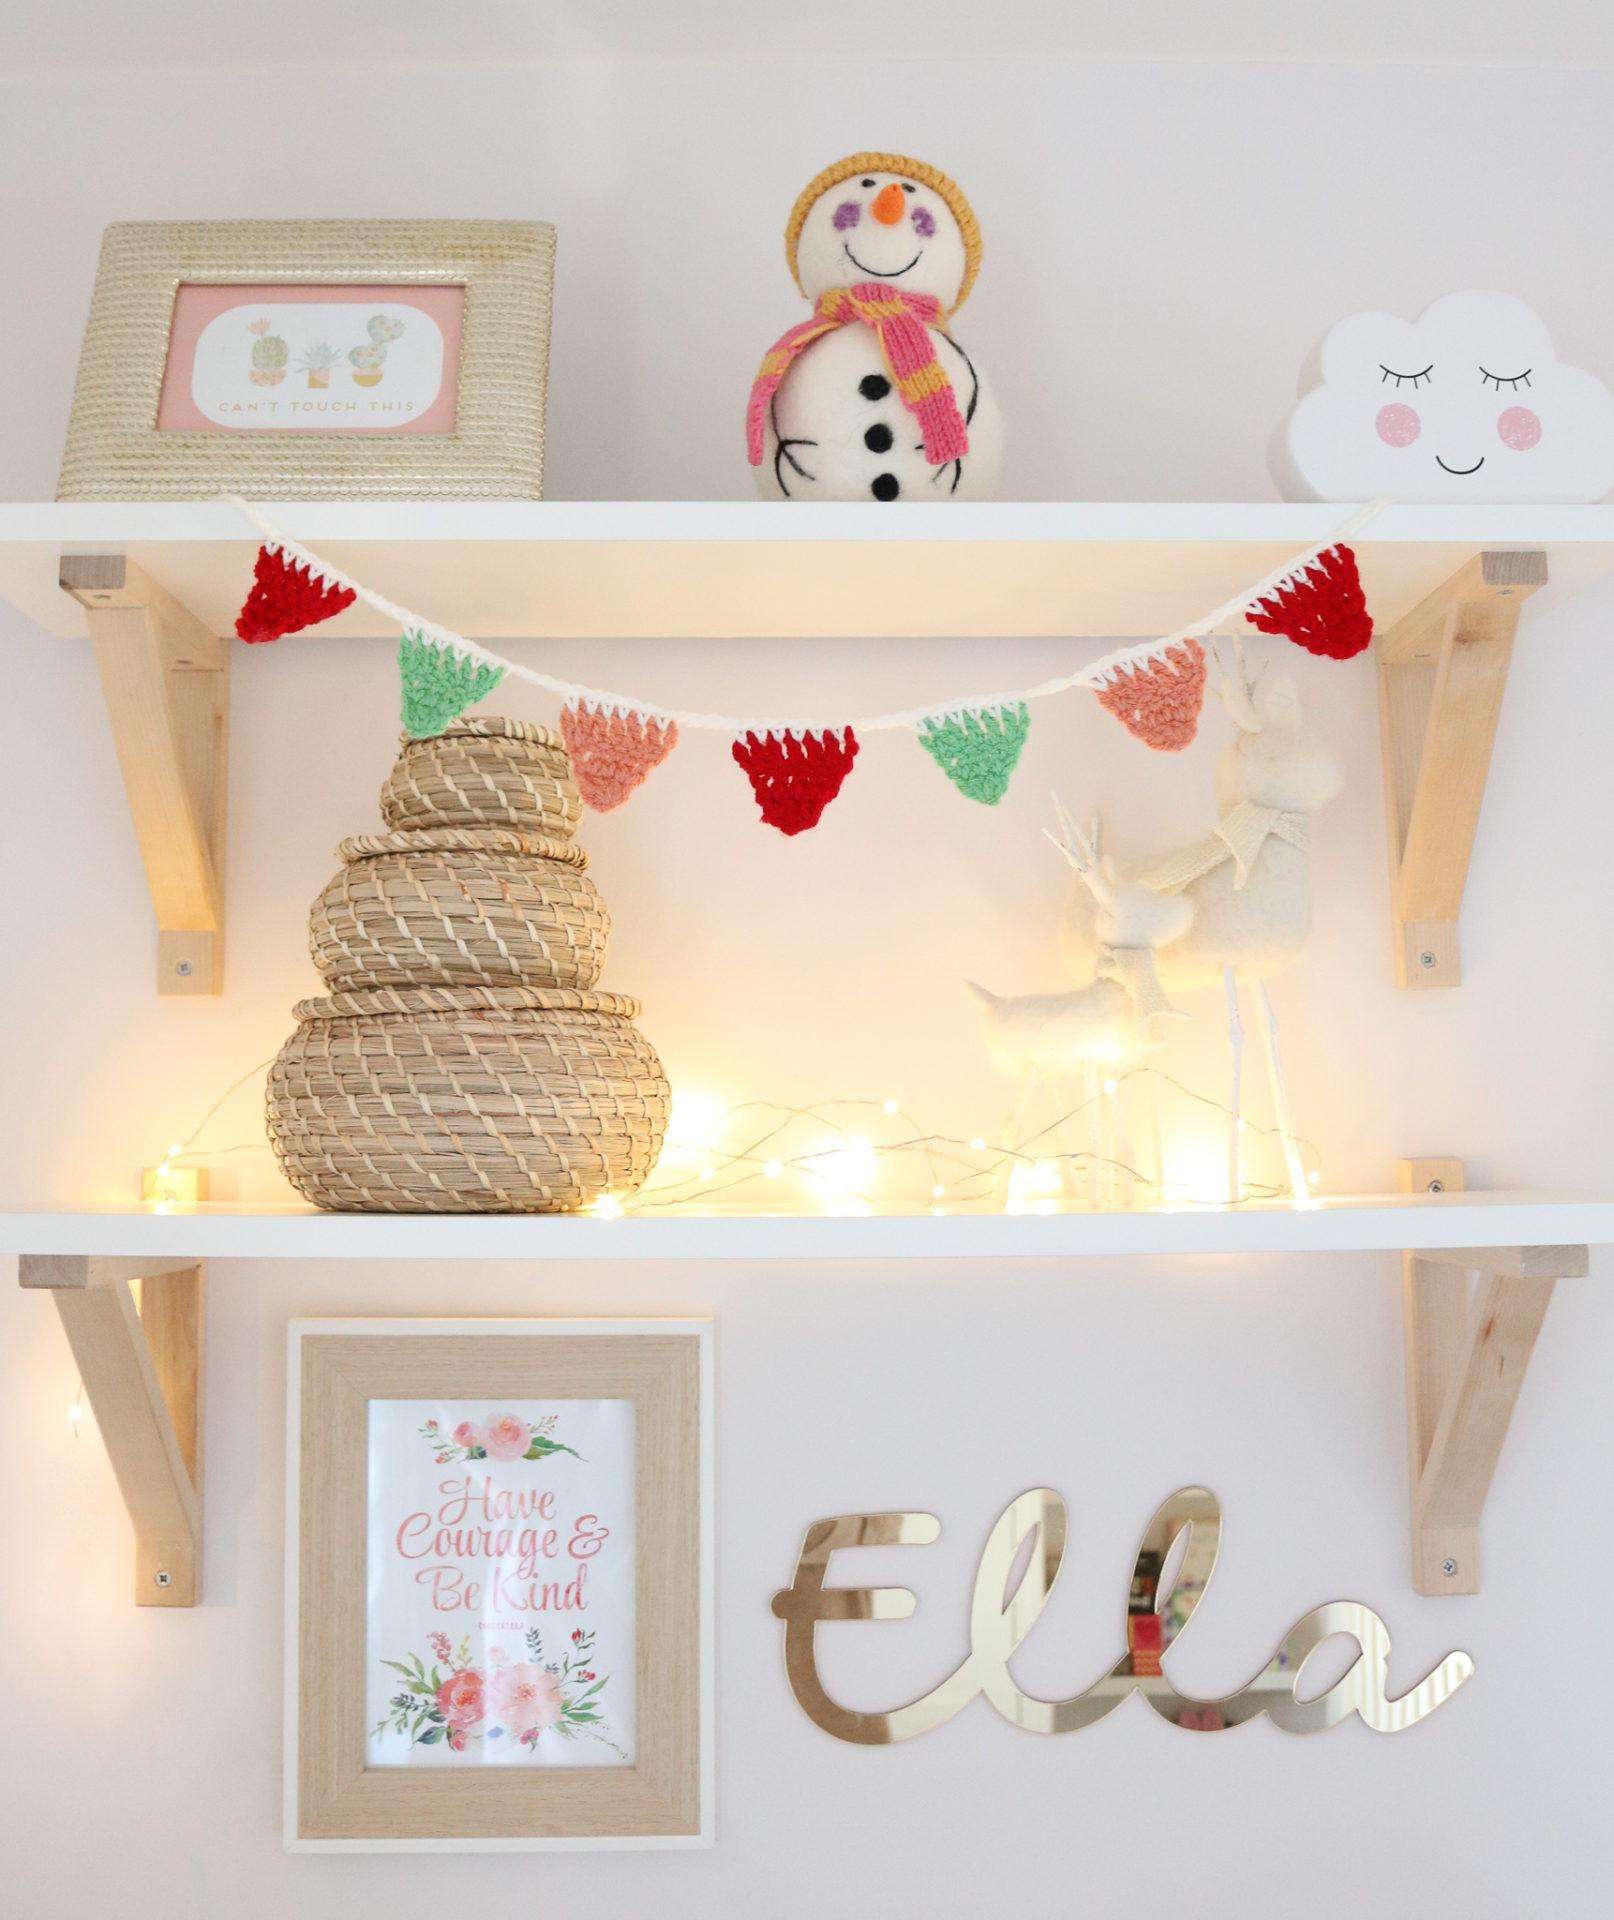 mini crochet bunting hung from a shelf in a bedroom, the shelves have some baskets, a ceramic cloud, a photo frame and a felt snowman on them. 